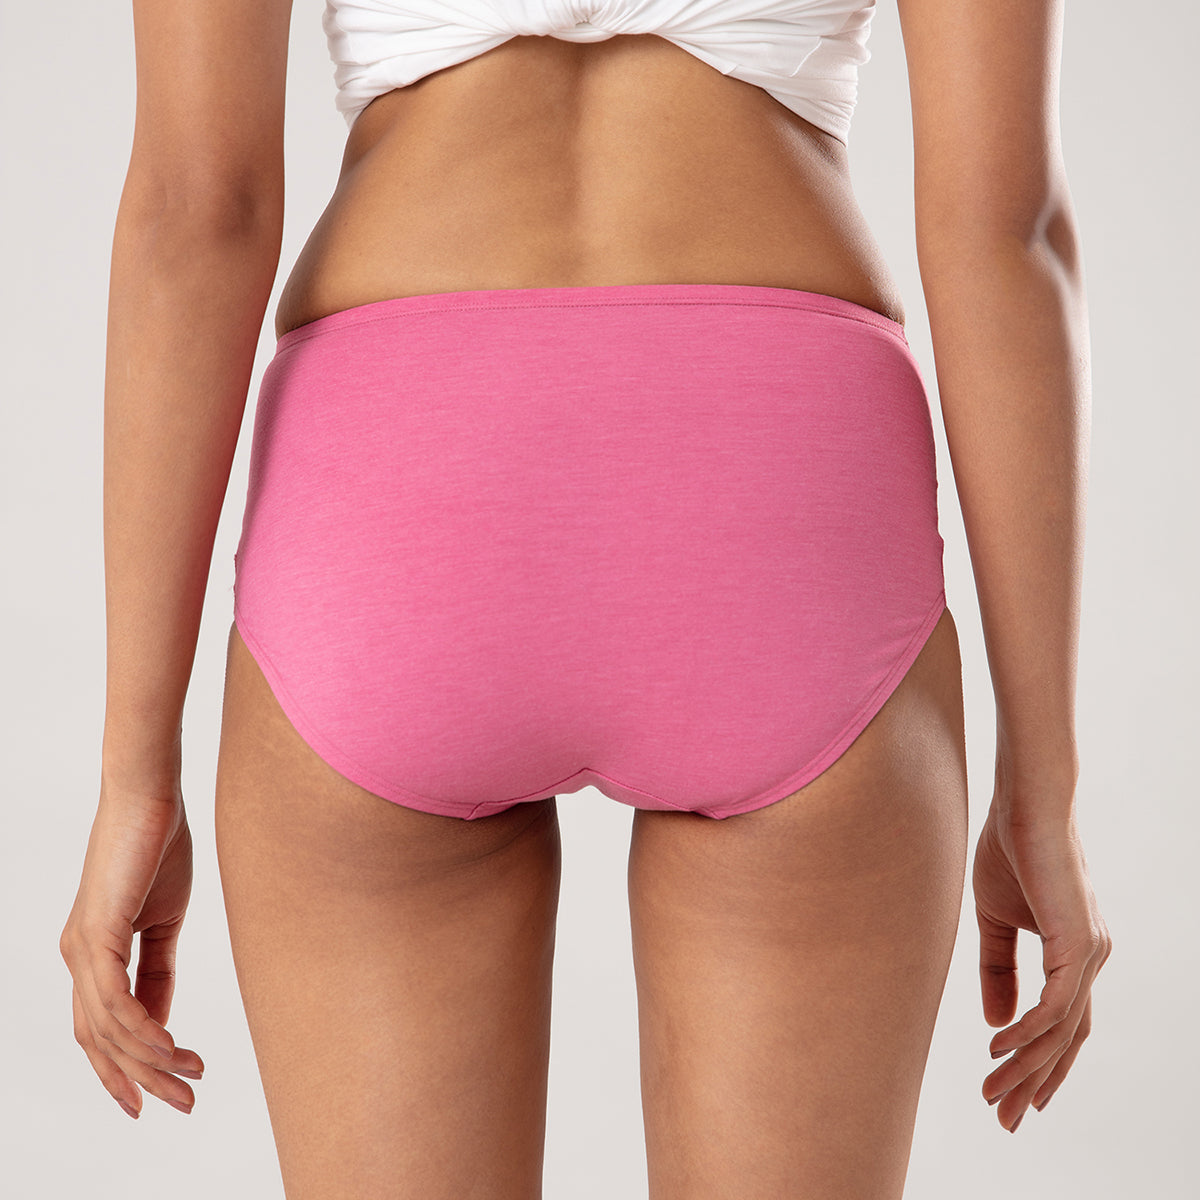 Pack Of 3 High Rise Full Brief Cotton Stretch Full Rear Coverage Panty NYP123-Multi colour